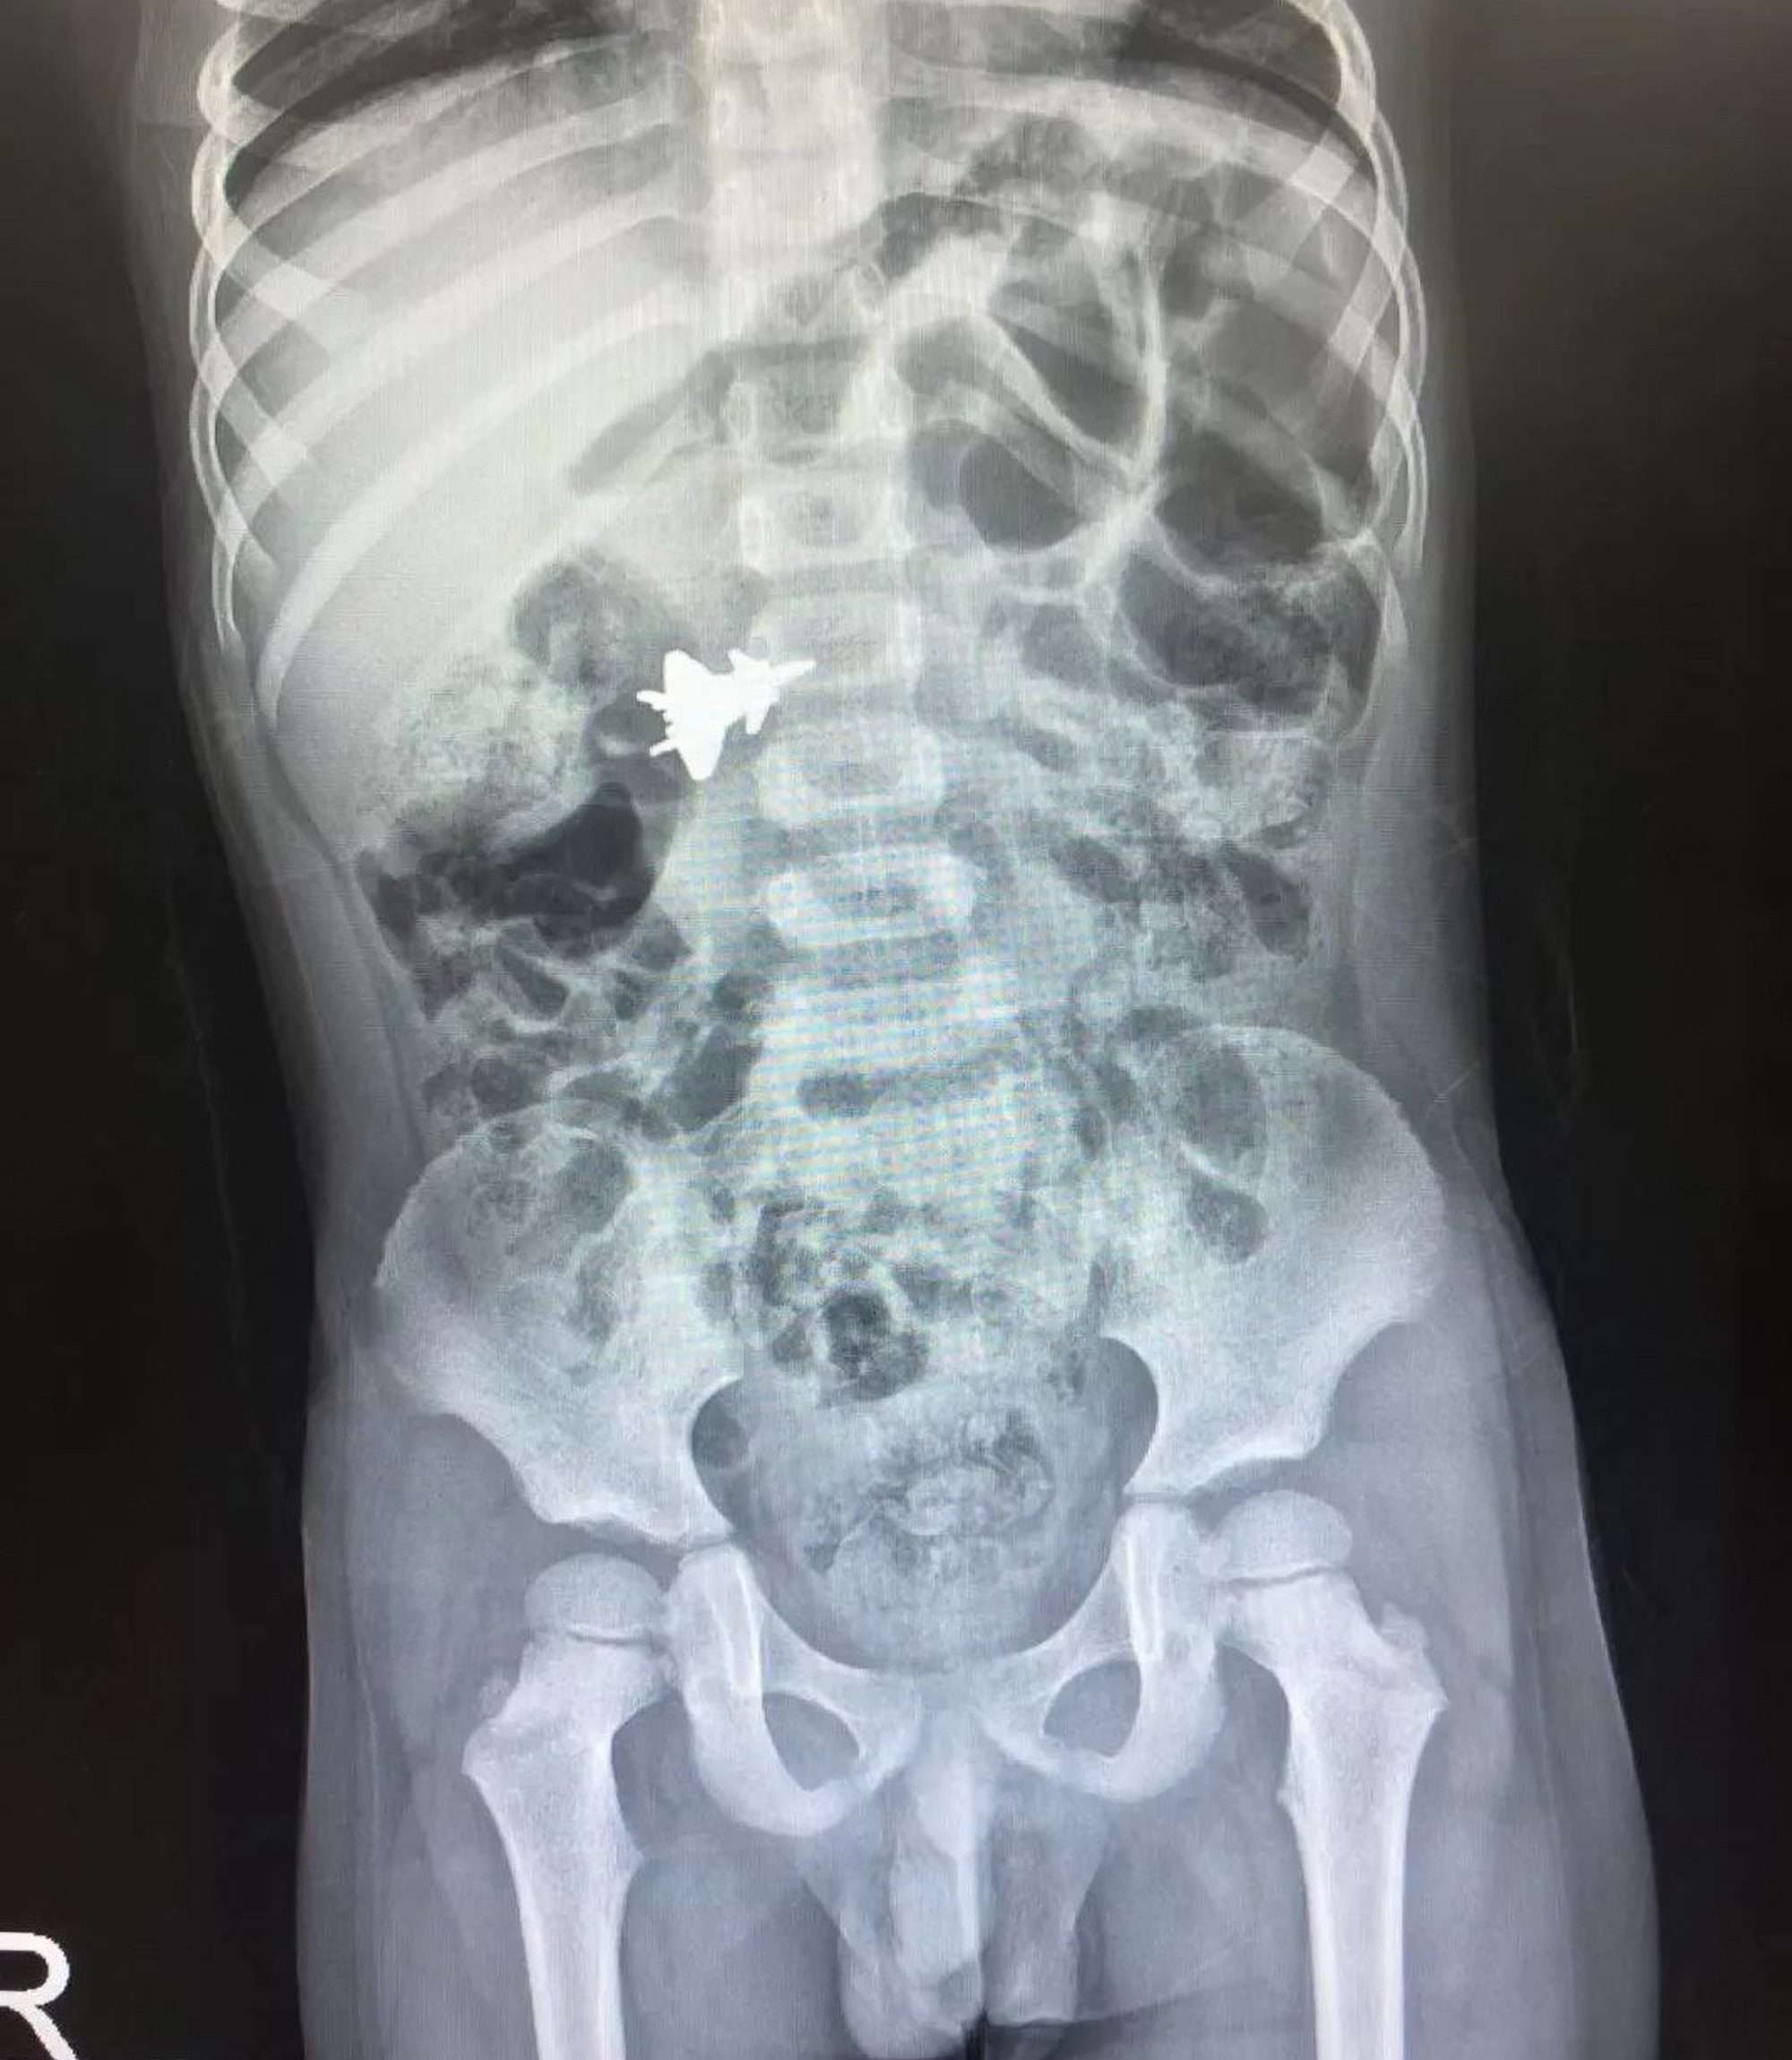 Read more about the article Series Of X-Rays Monitors ‘Flight’ Of Toy Jet Through Small Boy’s Digestive System